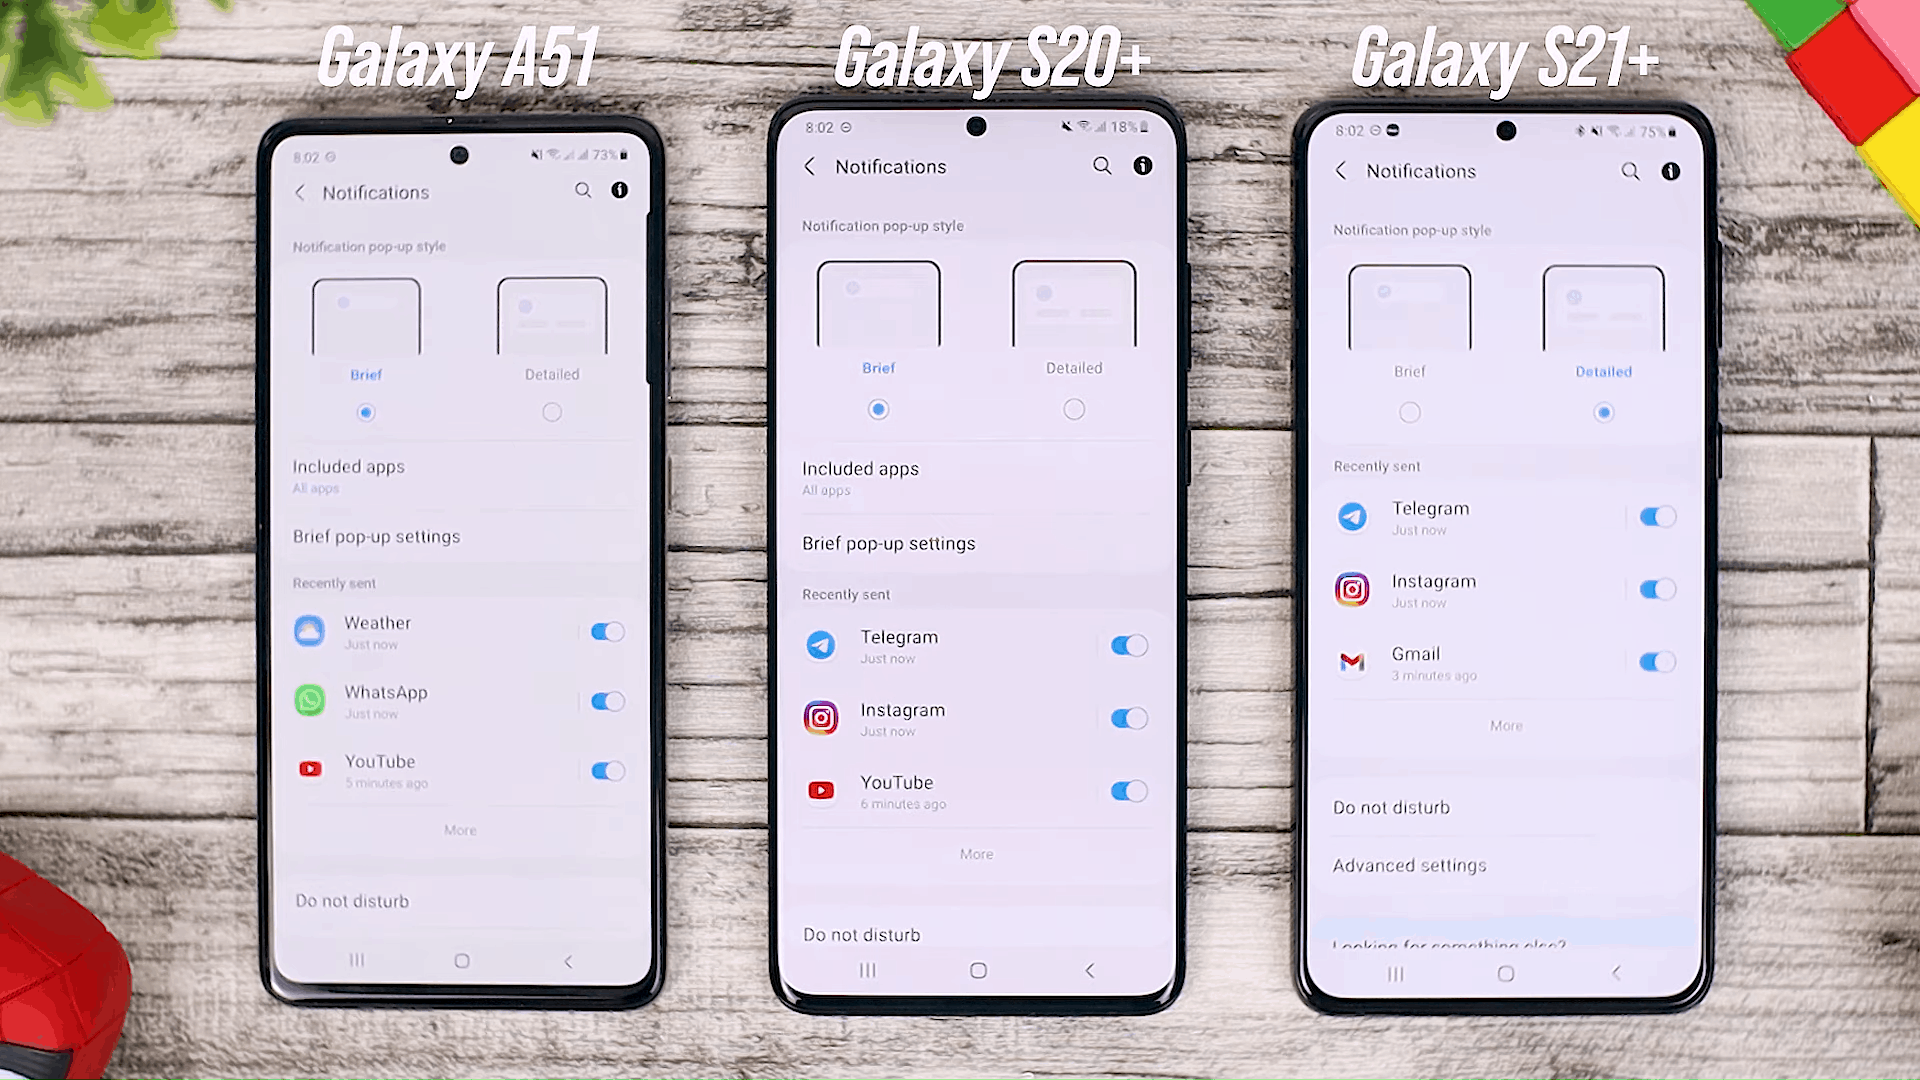 Bubble Notification & News Smart Pop-up View - One UI 3.0 features of Samsung Galaxy A51 and its comparison with the Galaxy S20+ and One UI 3.1 on the Galaxy S21+